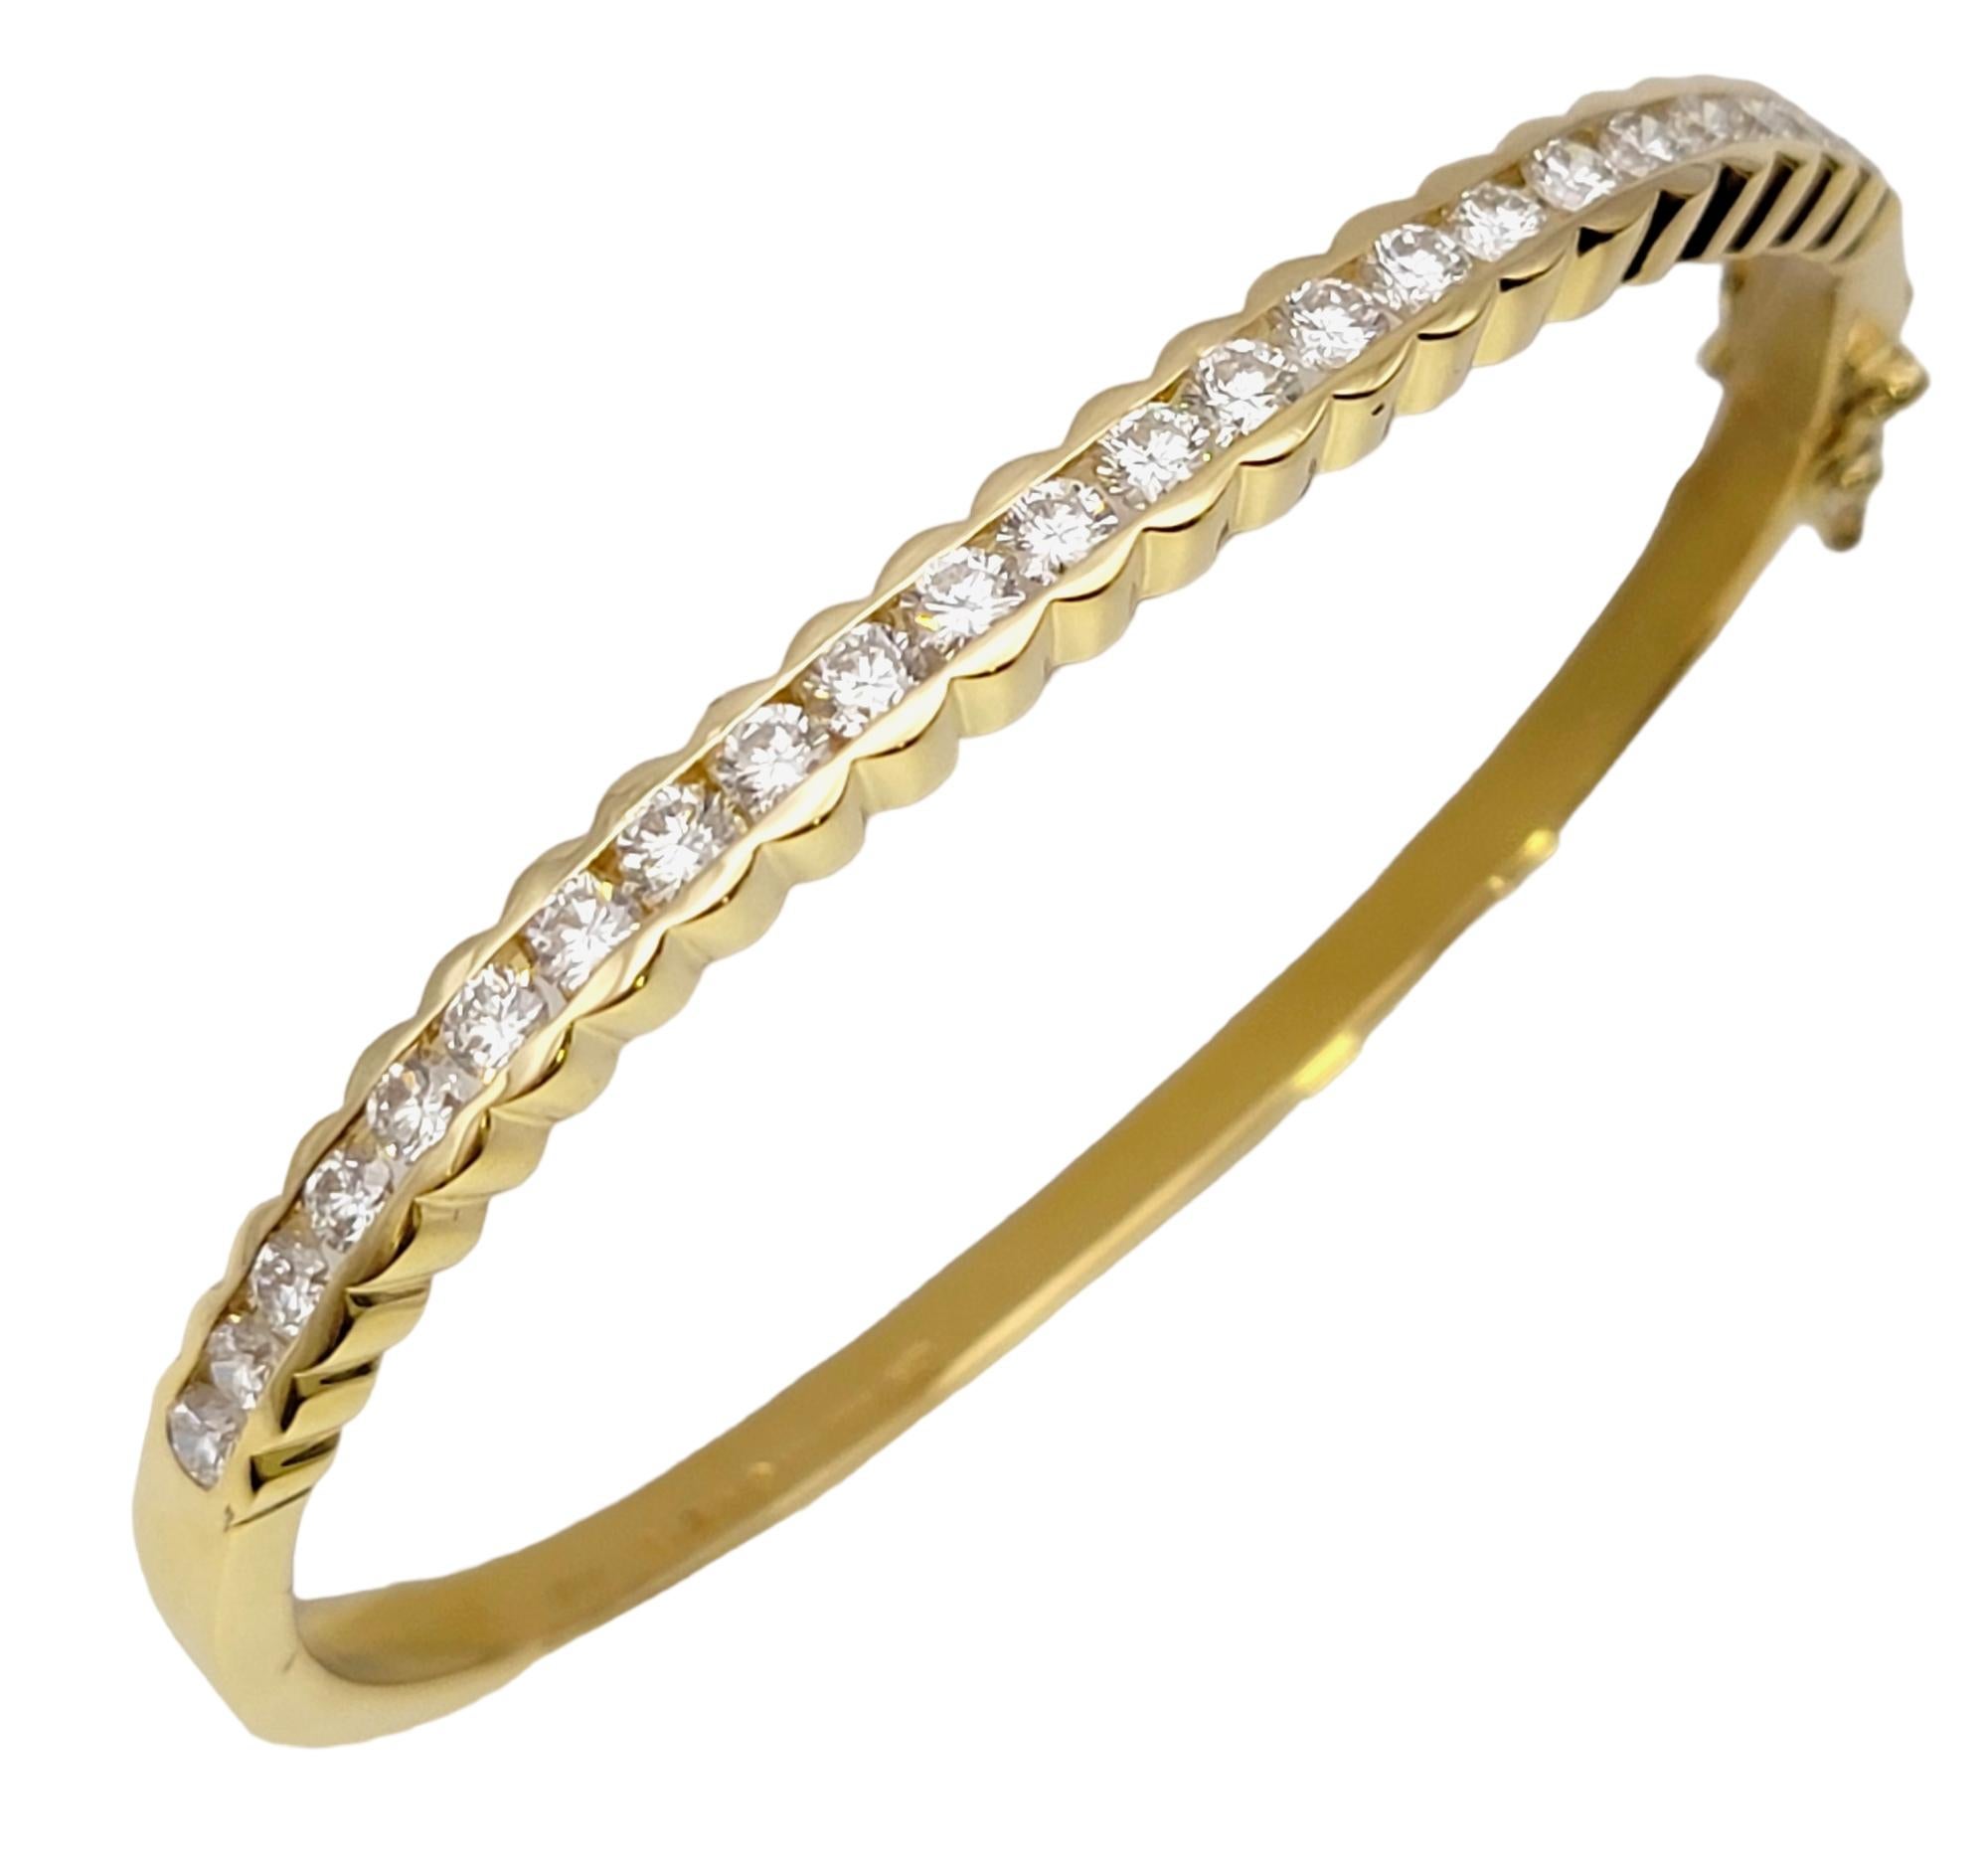 Gorgeous bangle bracelet with scalloped edges and a dazzling diamond detail. The classically designed bangle will wrap your wrist with elegance and give a sophisticated look that you will simply love.   

This beautiful bangle is made of luxurious